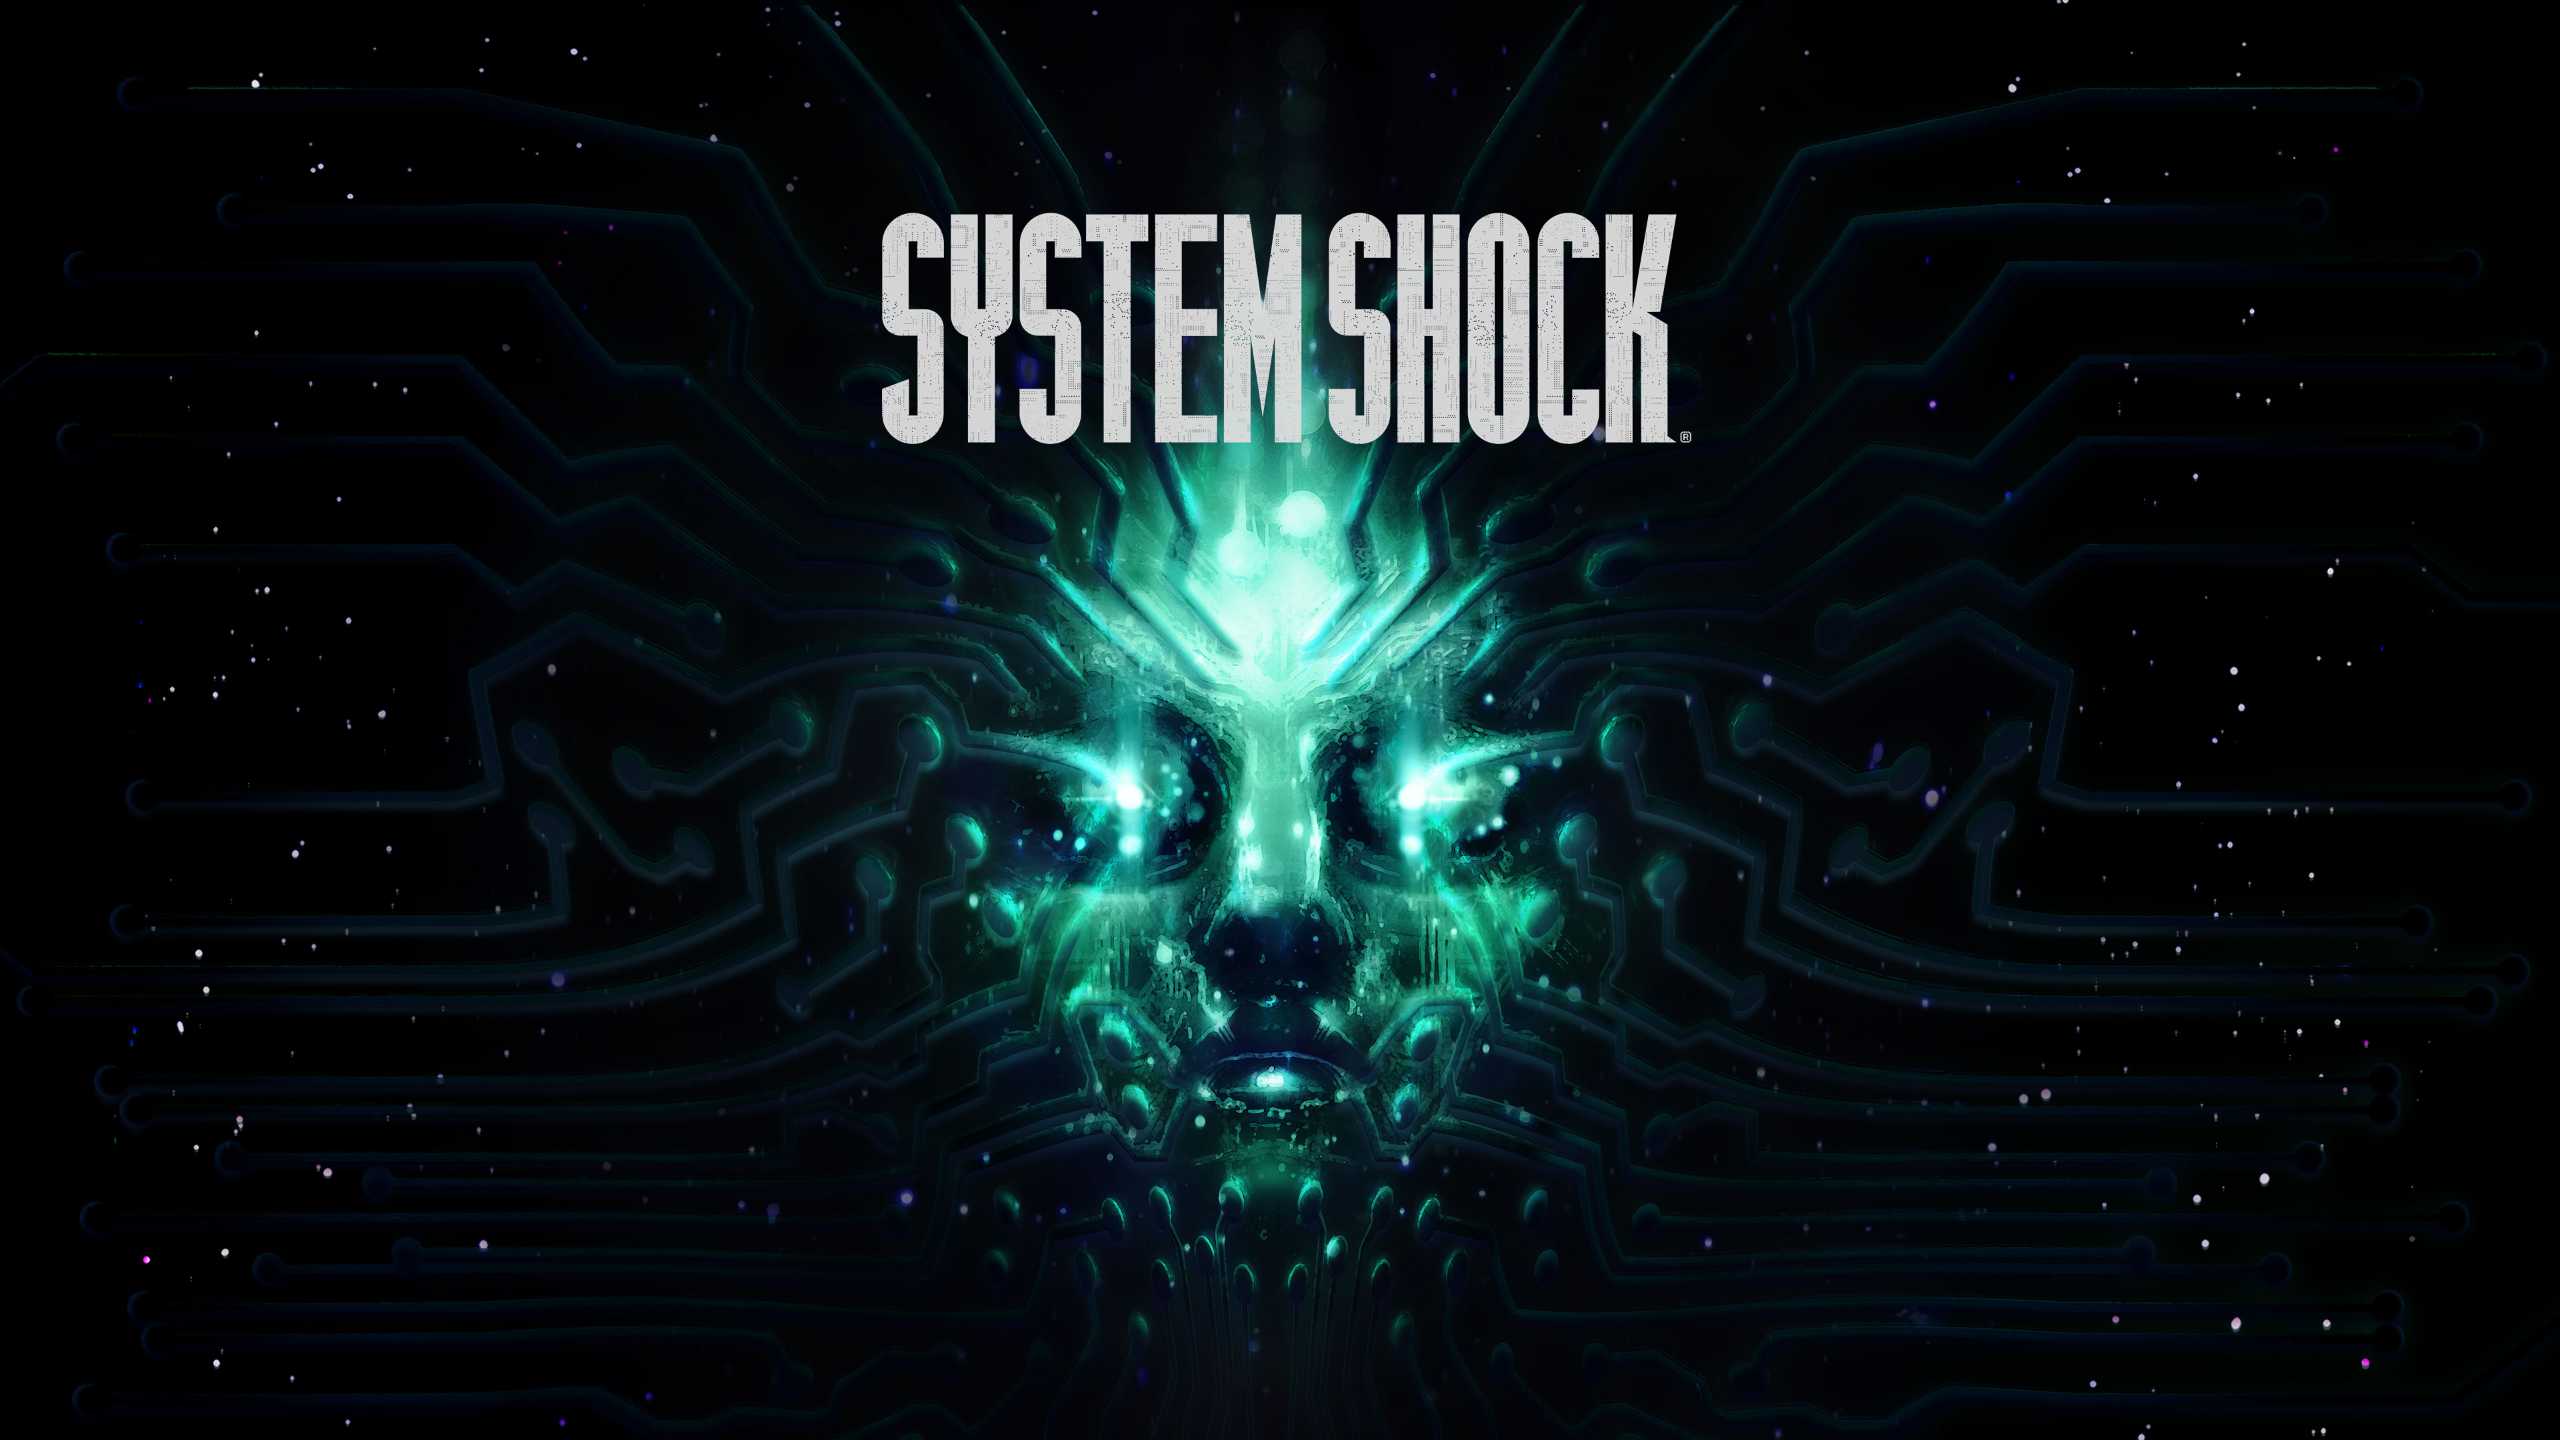 SYSTEM SHOCK will be released worldwide on May 30, 2023 for PC